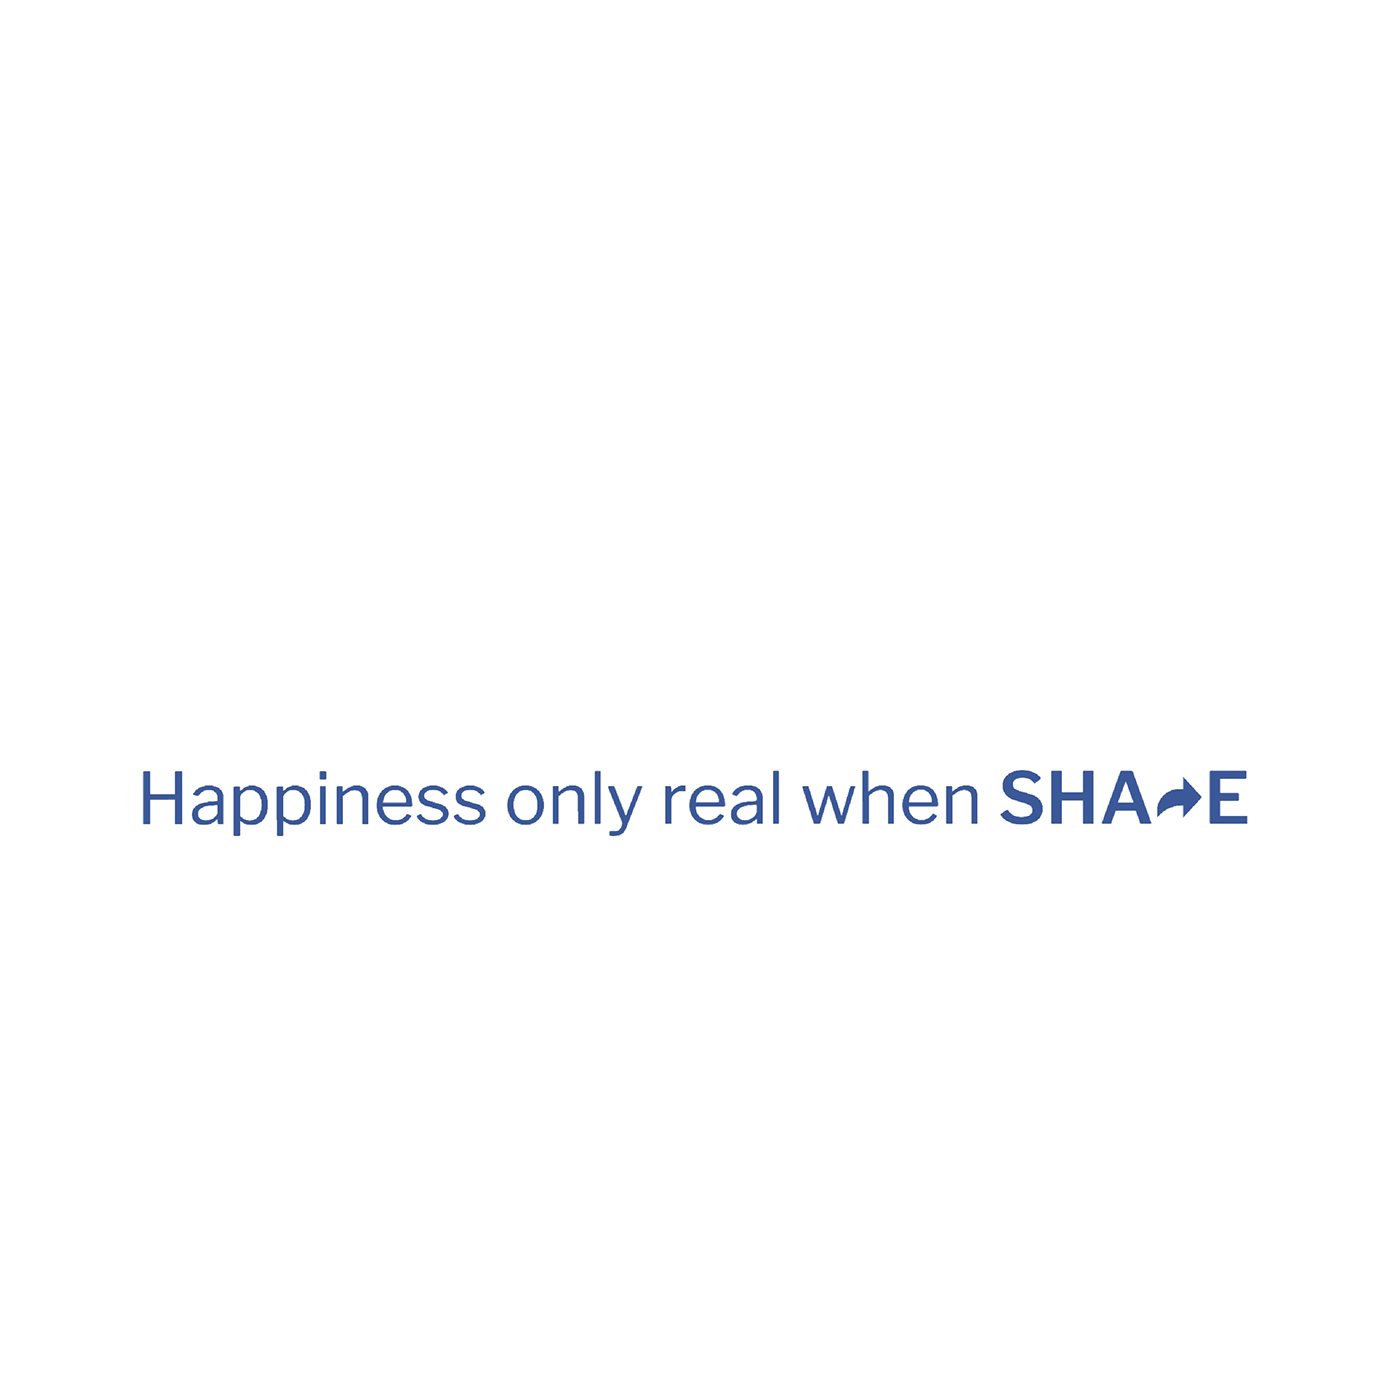 When Christopher Mccandless (Into the wild) wrote "Happiness only real when shared" back in 1992 he didnt know that the word "Share" will have a completely different meaning in the future and will affect people's lack of happiness.This is my 2019 version of this sentence